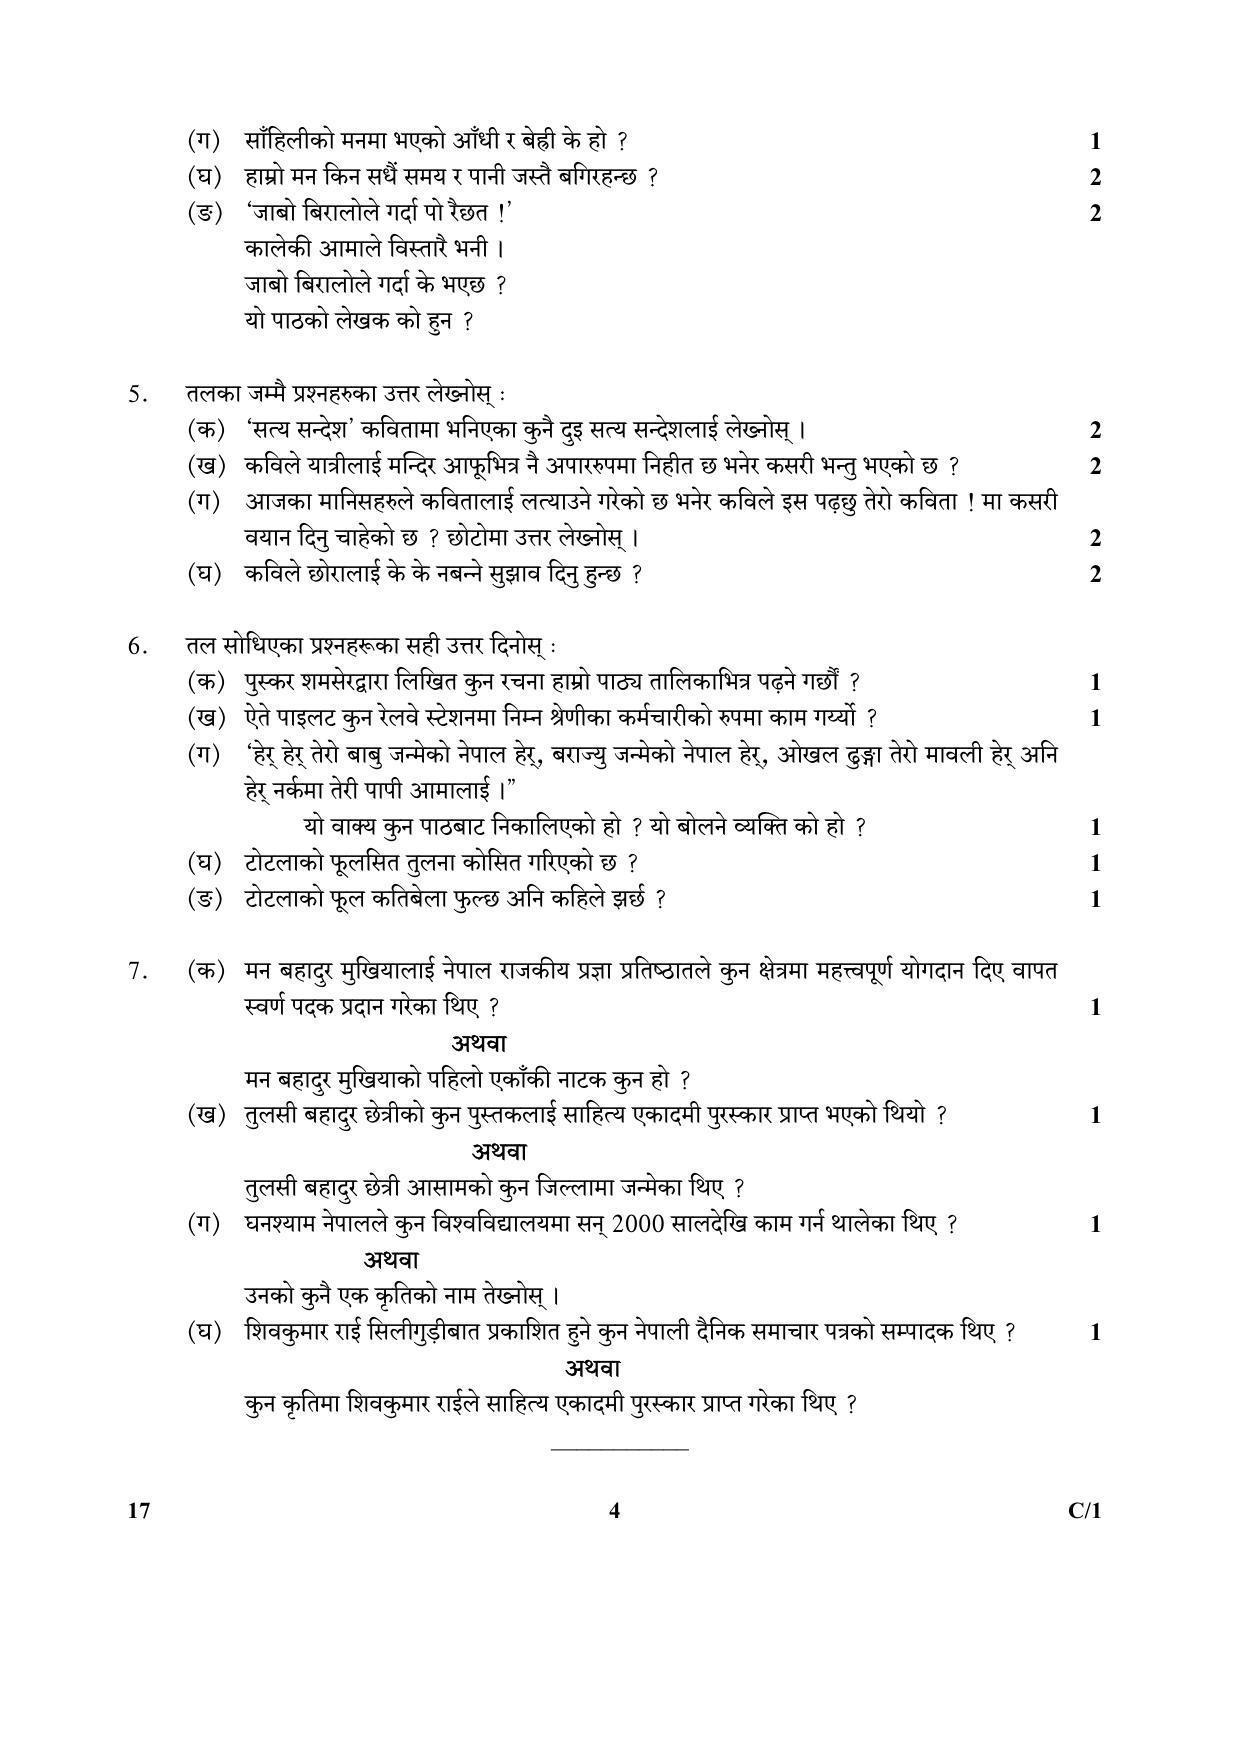 CBSE Class 10 17 (Nepali) 2018 Compartment Question Paper - Page 4